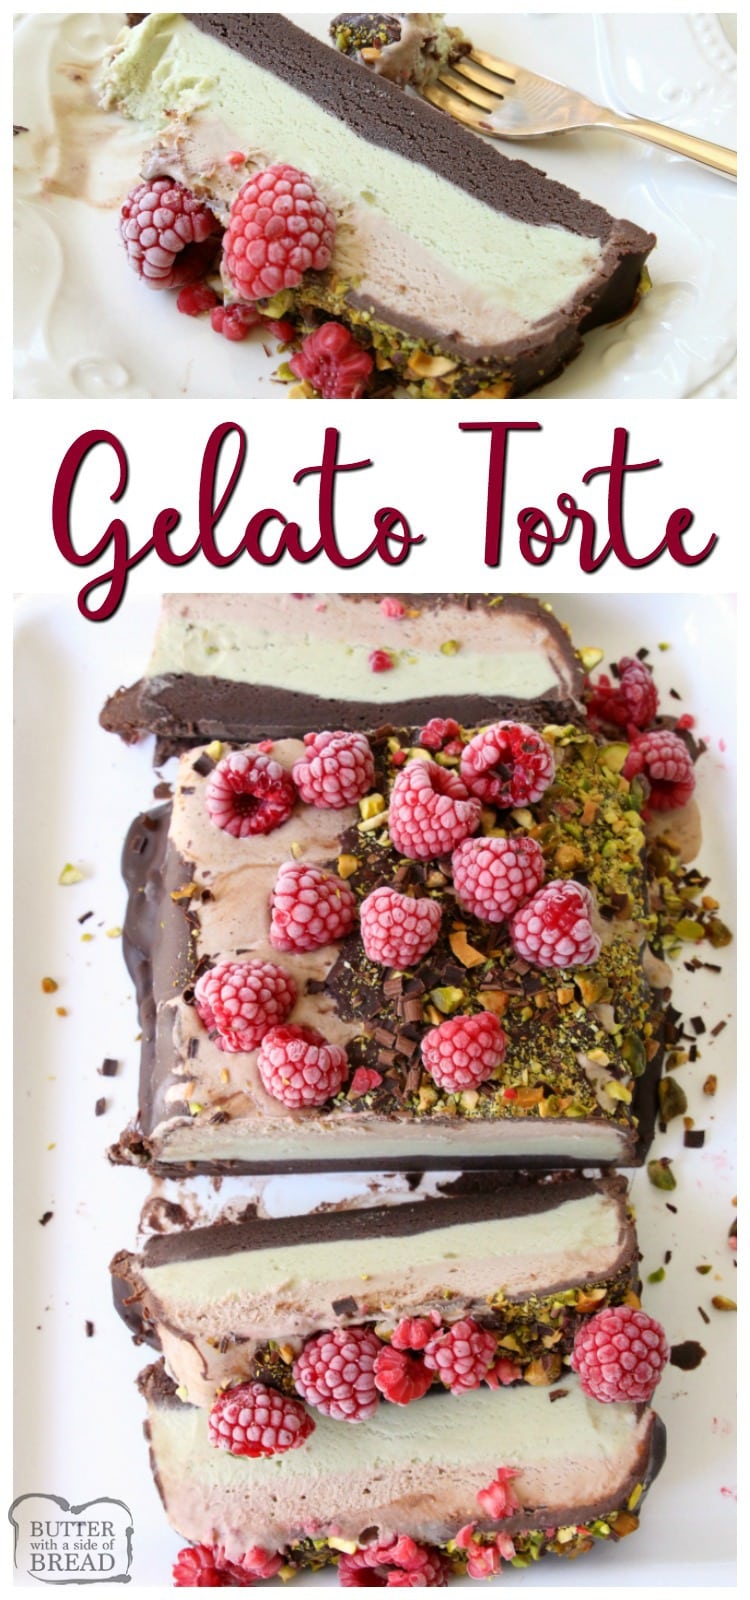 Gorgeous Gelato Torte recipe with incredible blend of flavors. Three layers of rich, creamy gelato topped with chocolate ganache, pistachios & fresh raspberries.Perfect summer #icecream #dessert #recipe from Butter With A Side of Bread AD